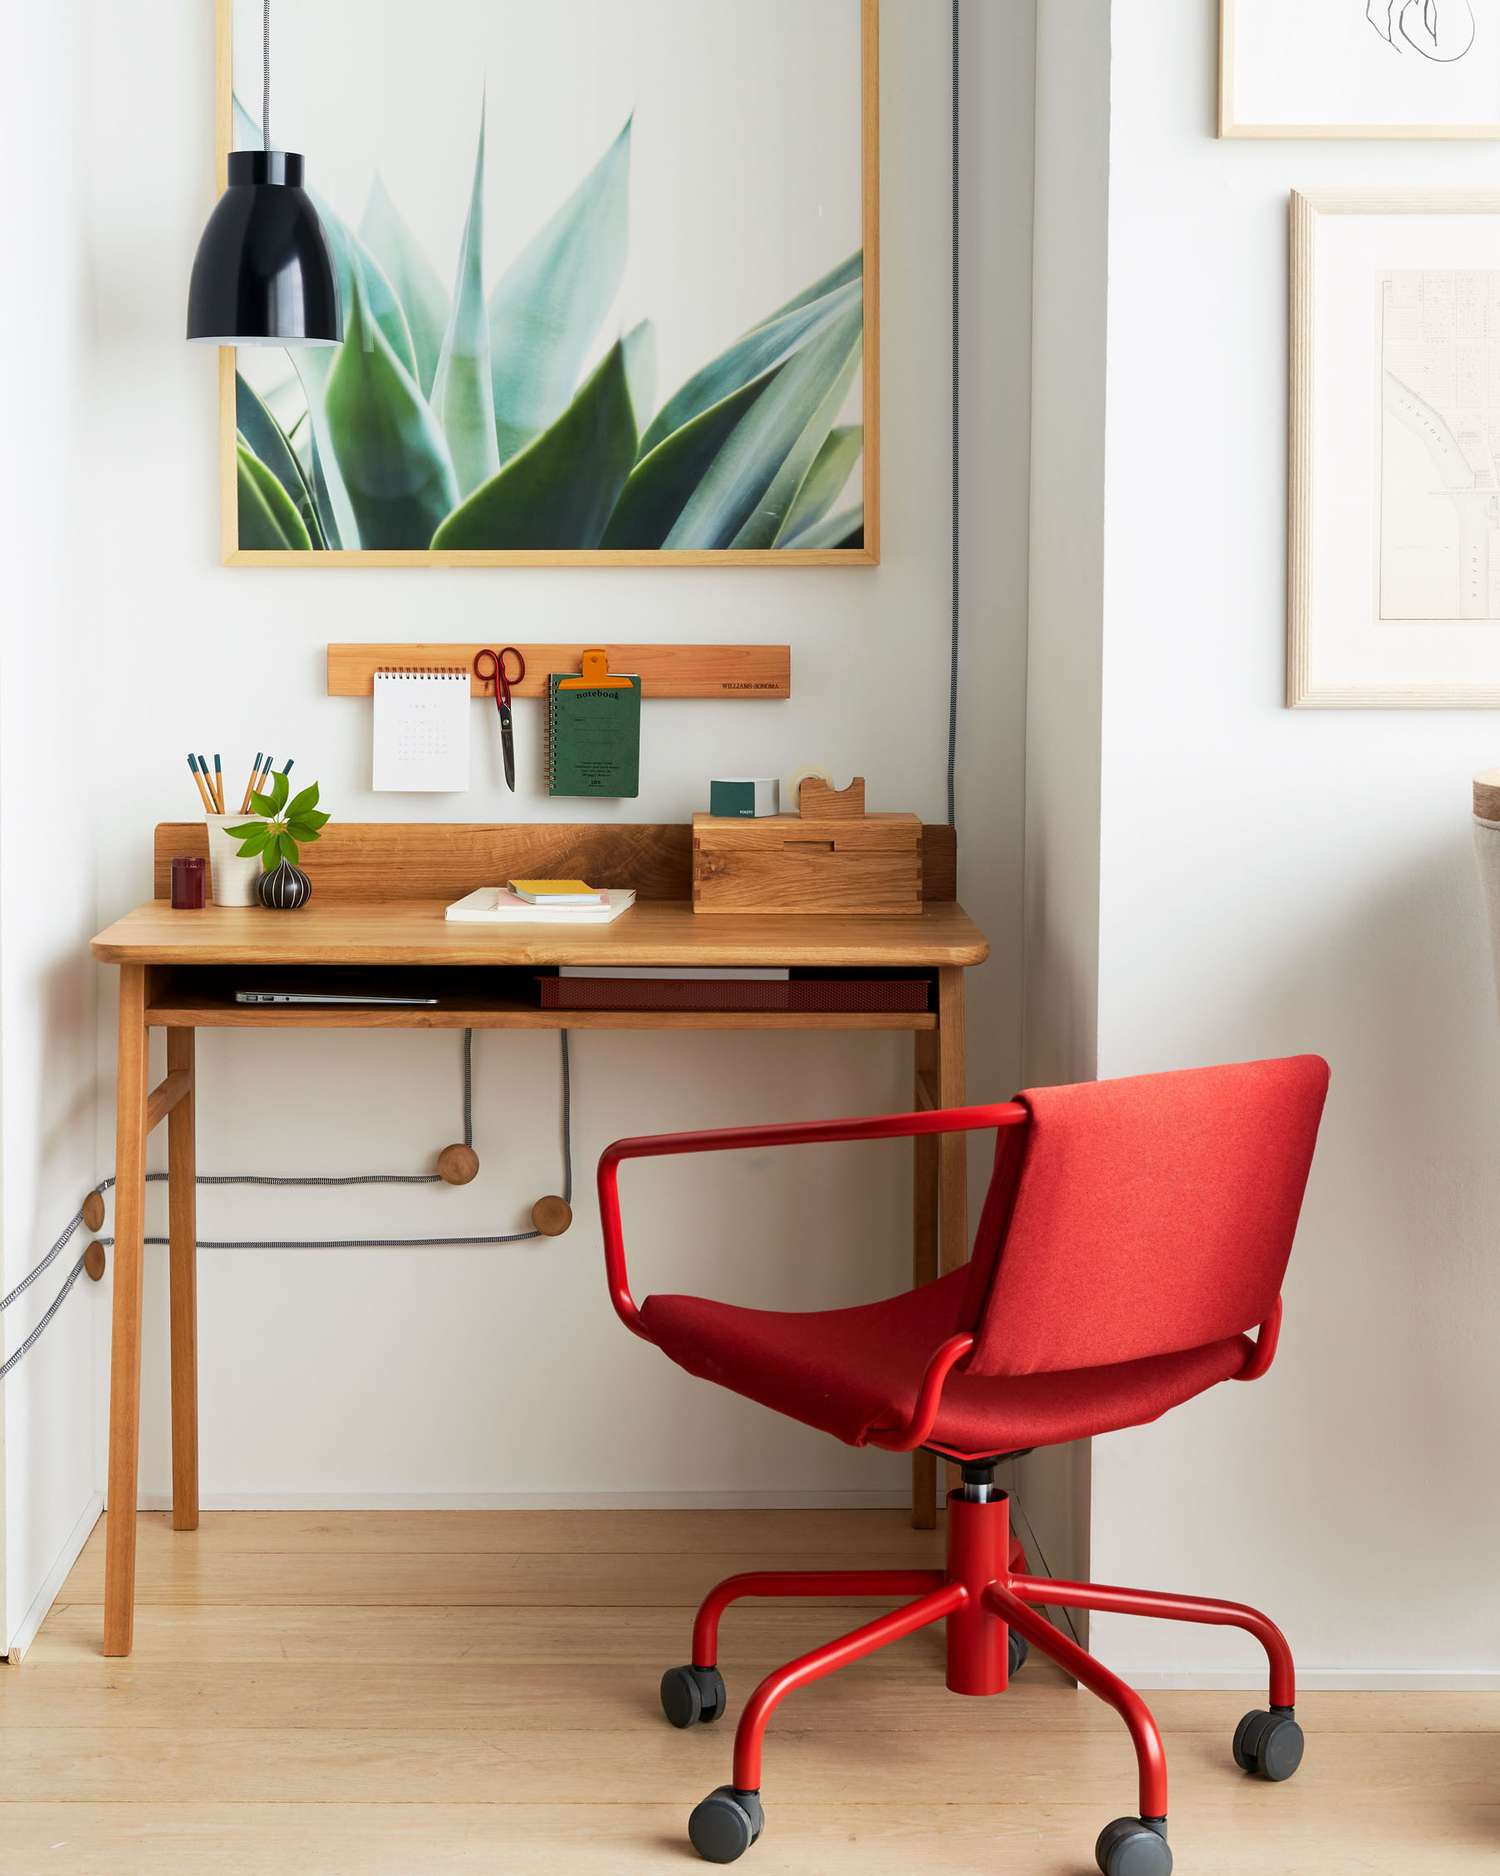 wood office desk with red chair on wheels